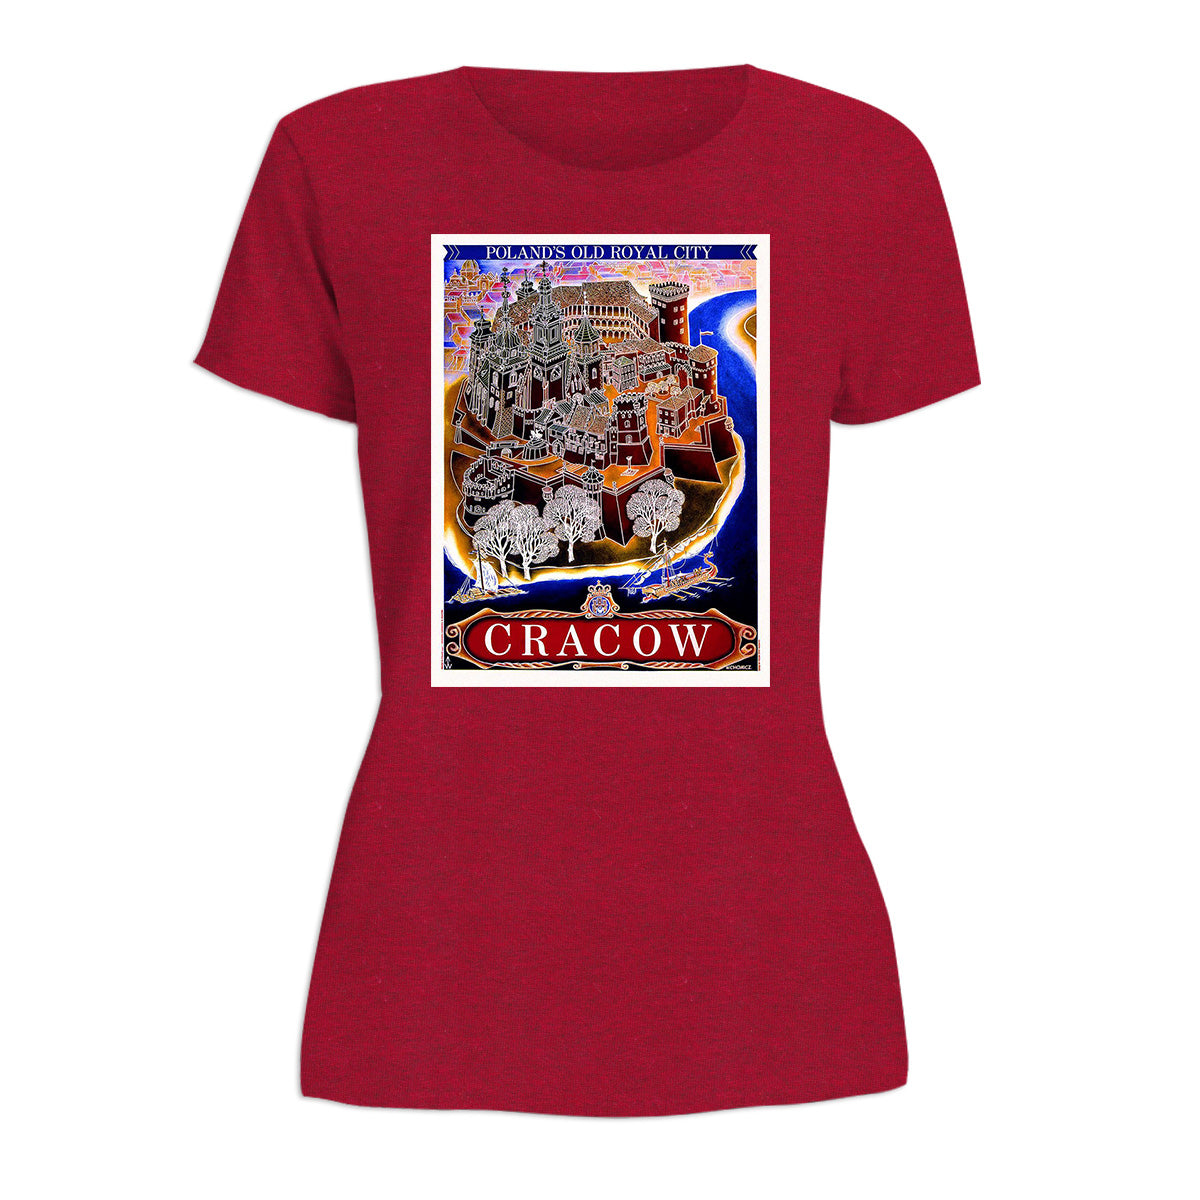 Vintage Poster Cracow PLs Old Royal City Women's Short Sleeve Tshirt